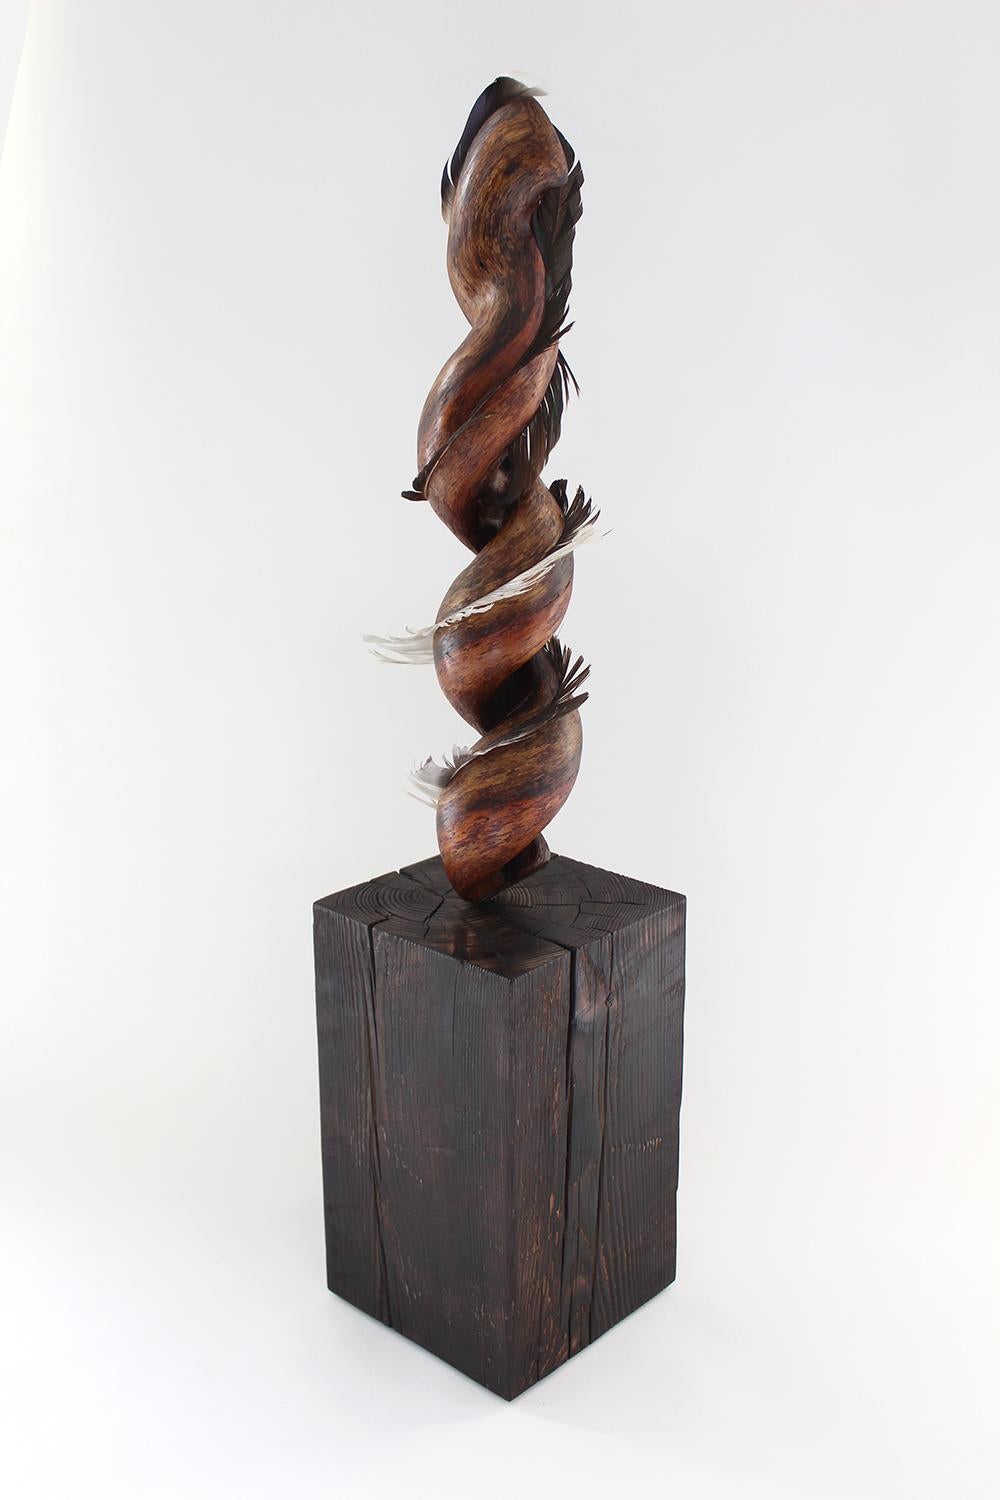 "Swishing Larkspur", contemporary, wood, white oak, feather, browns, sculpture - Sculpture by Miller Opie